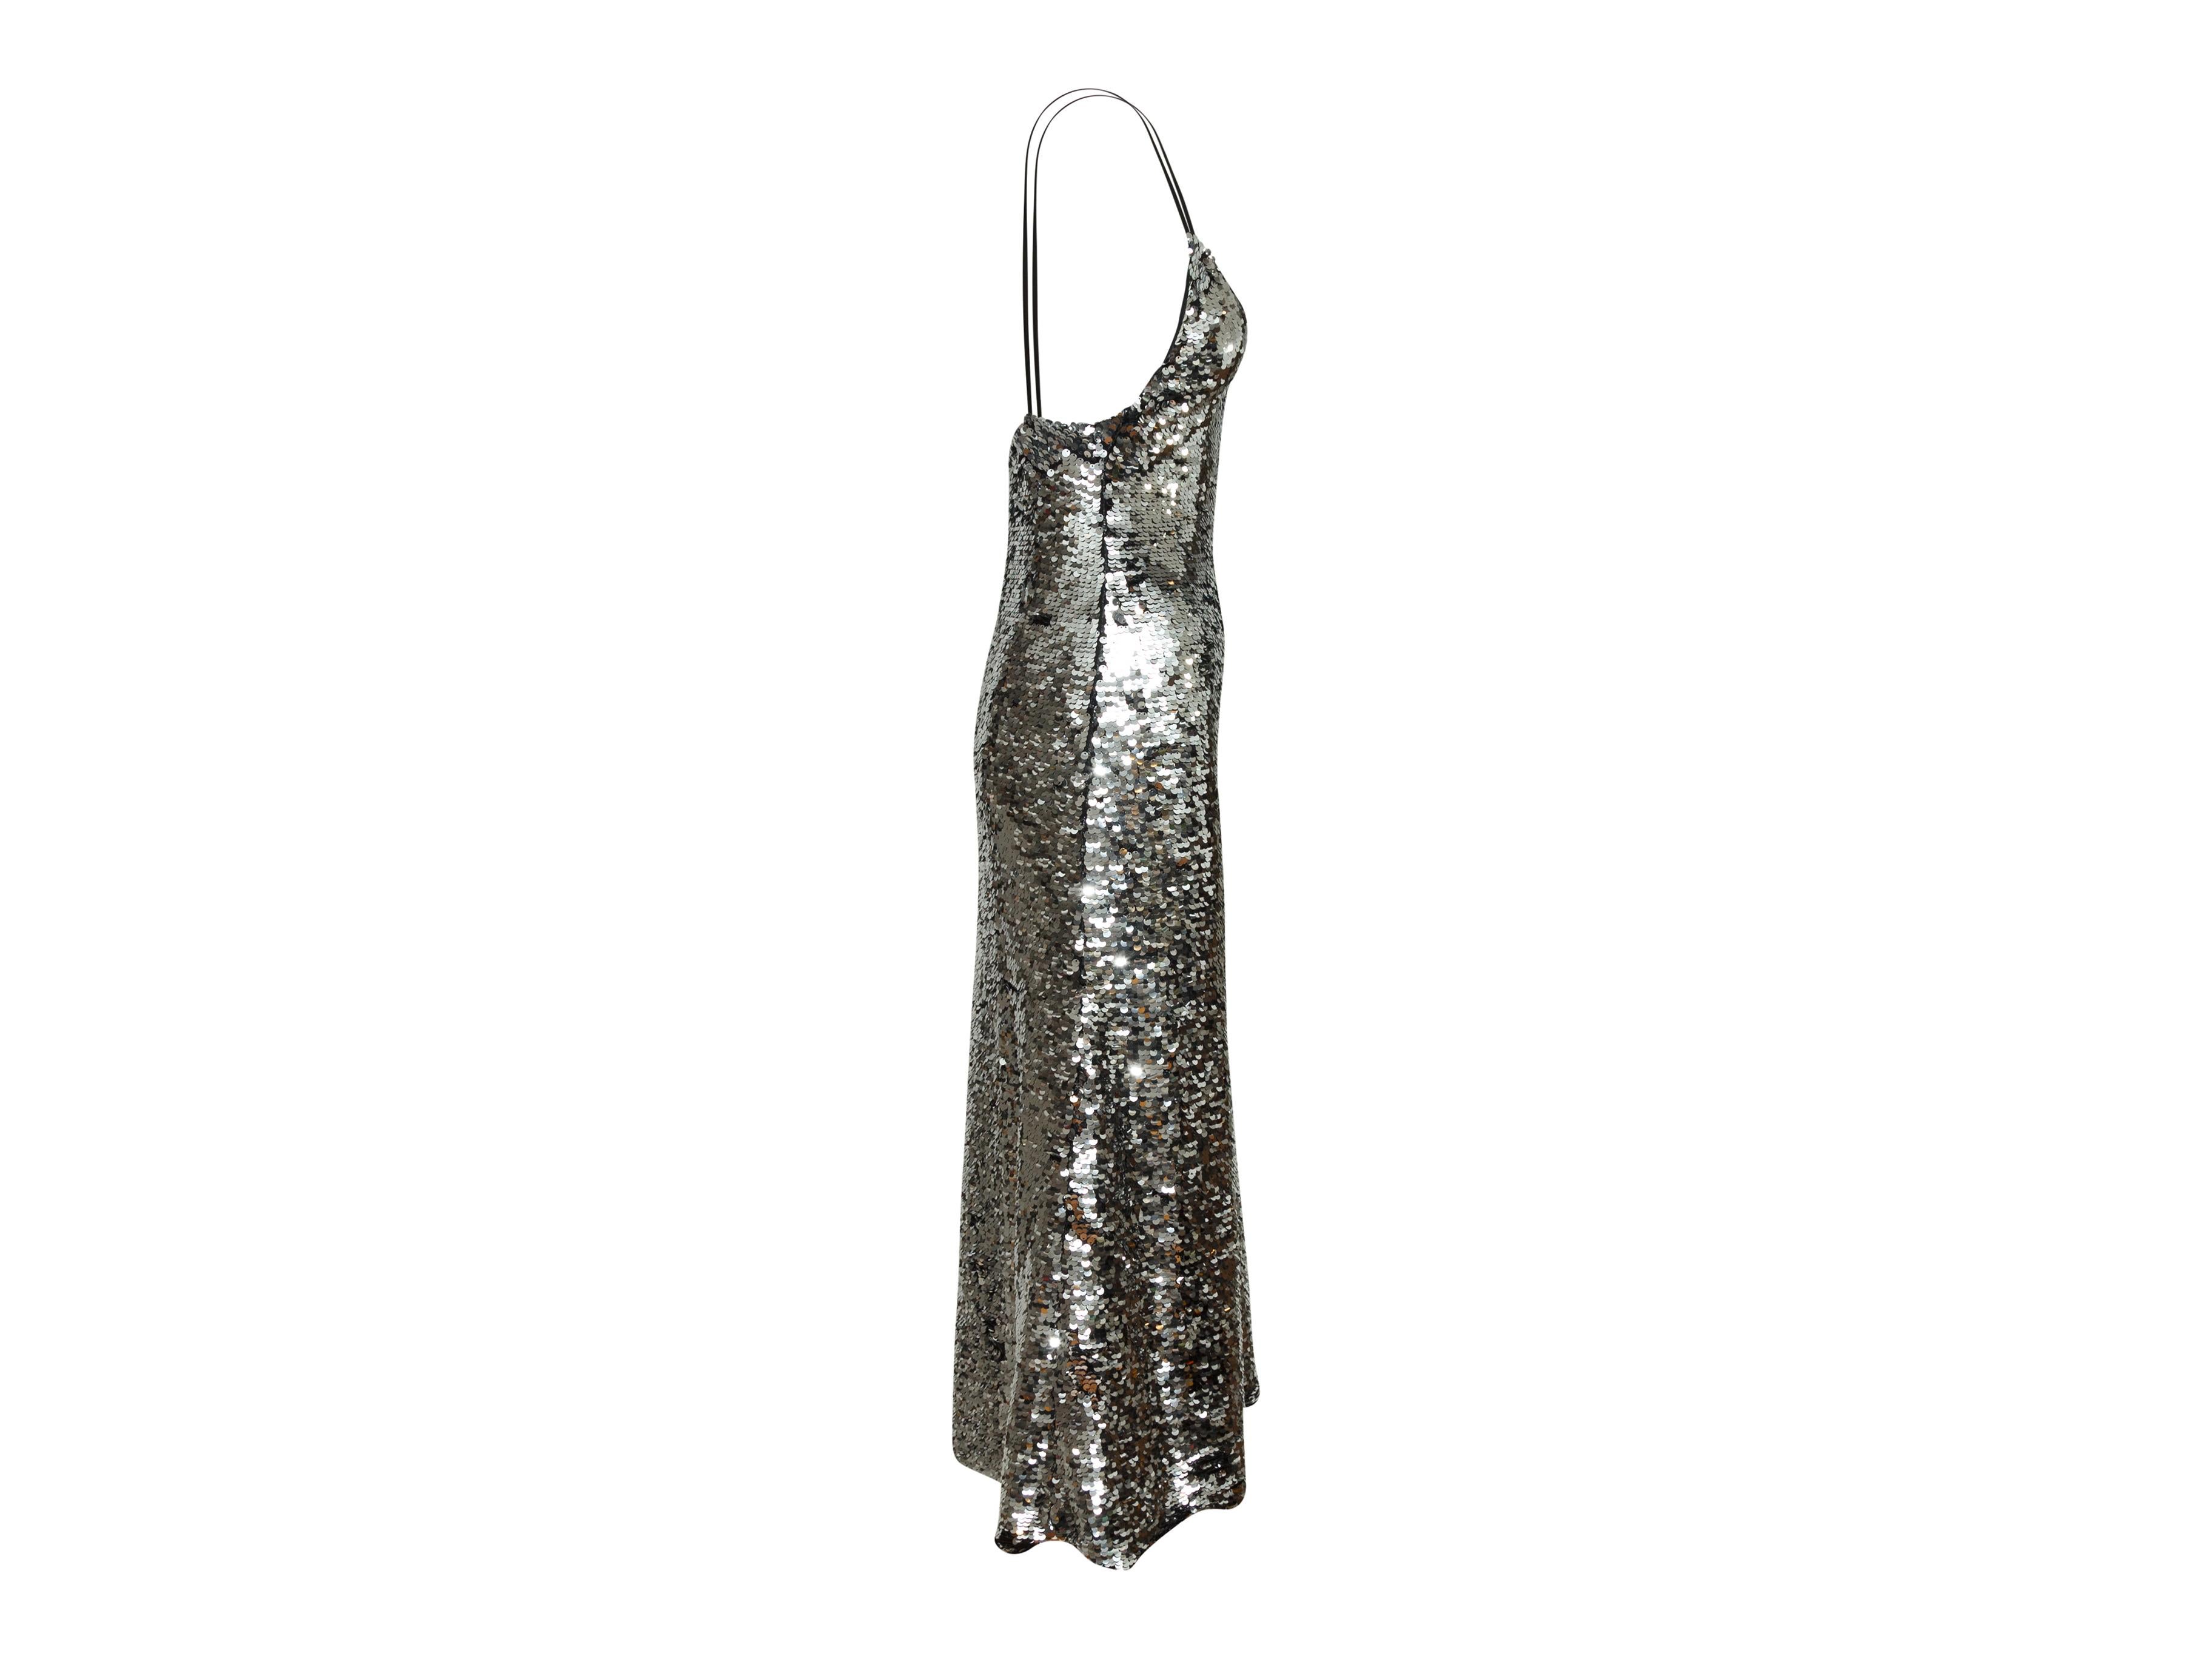 Product details: Silver metallic sleeveless evening dress by Off-White. V-neck. Sequin embellishments throughout. 29